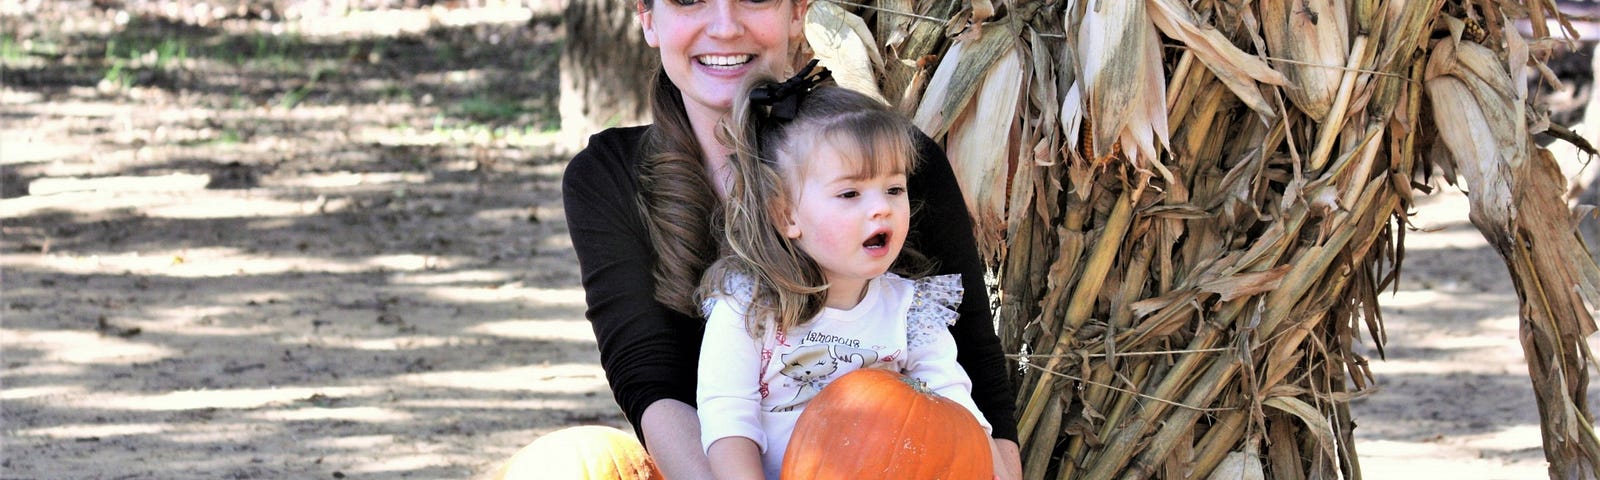 Young woman, mother, with child and pumpkins. Food grown on healthy, living soil can change the world.